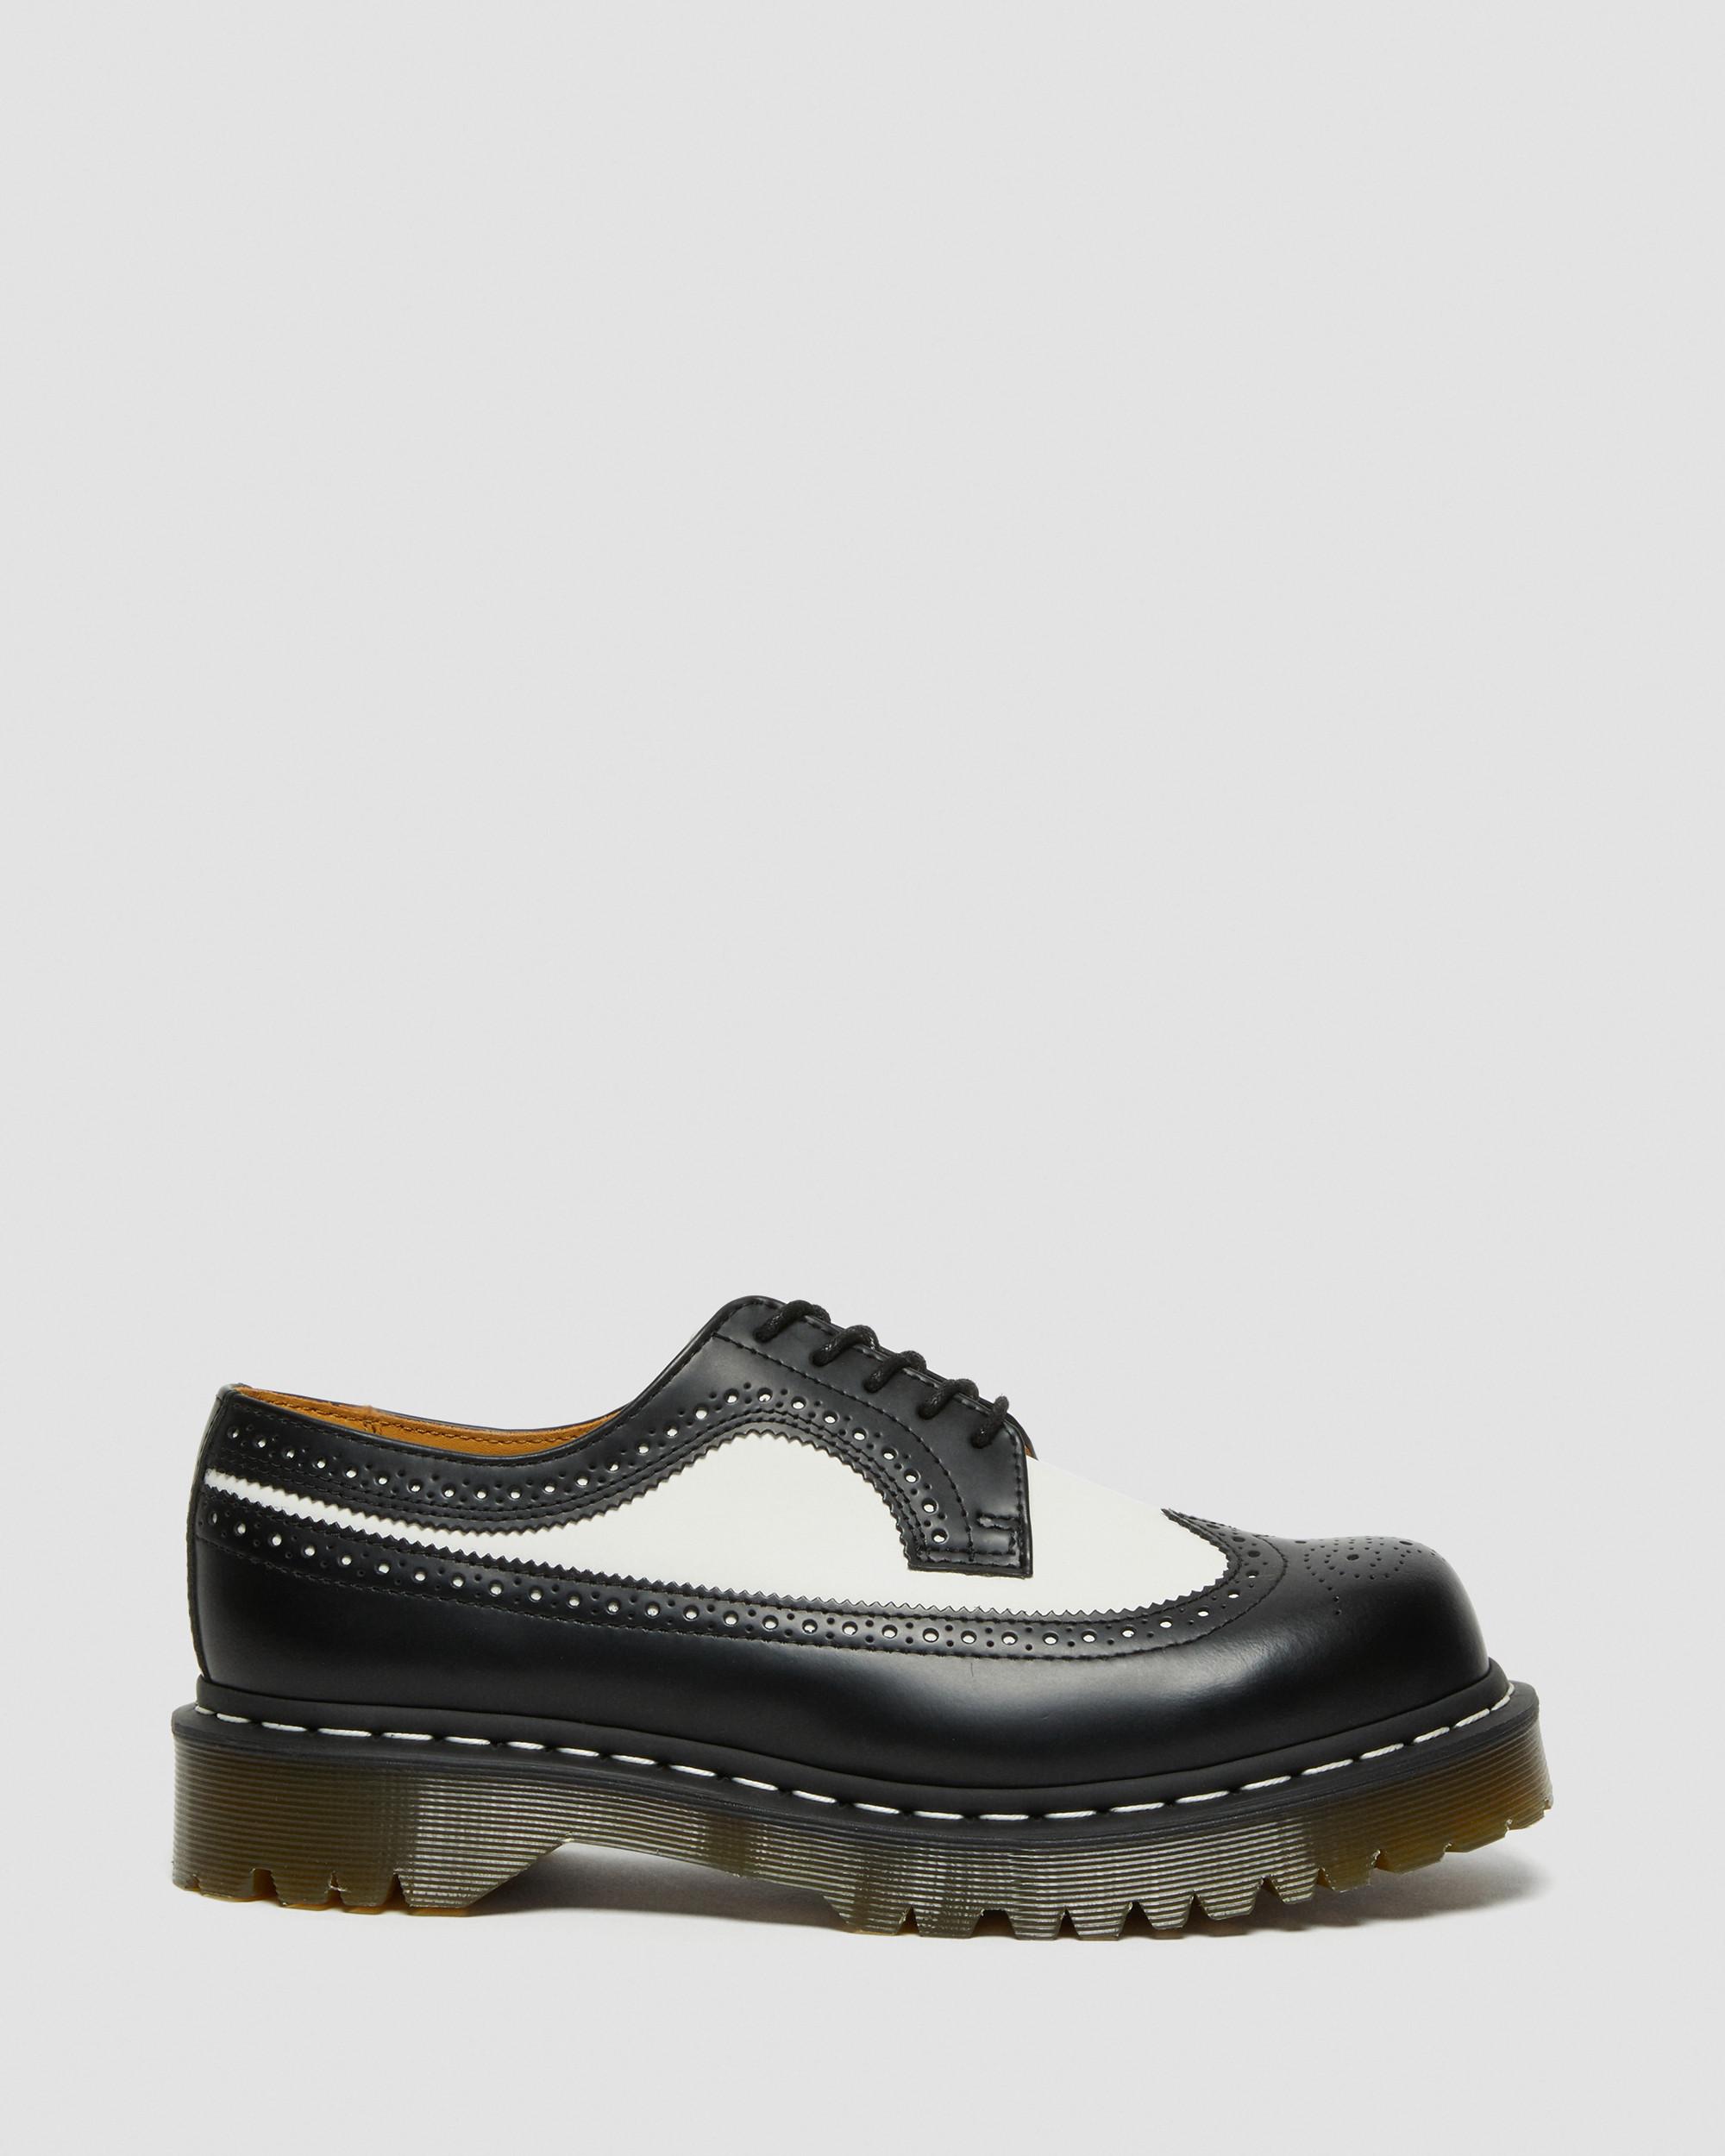 3989 Bex Smooth Leather Brogue Shoes | Dr. Martens